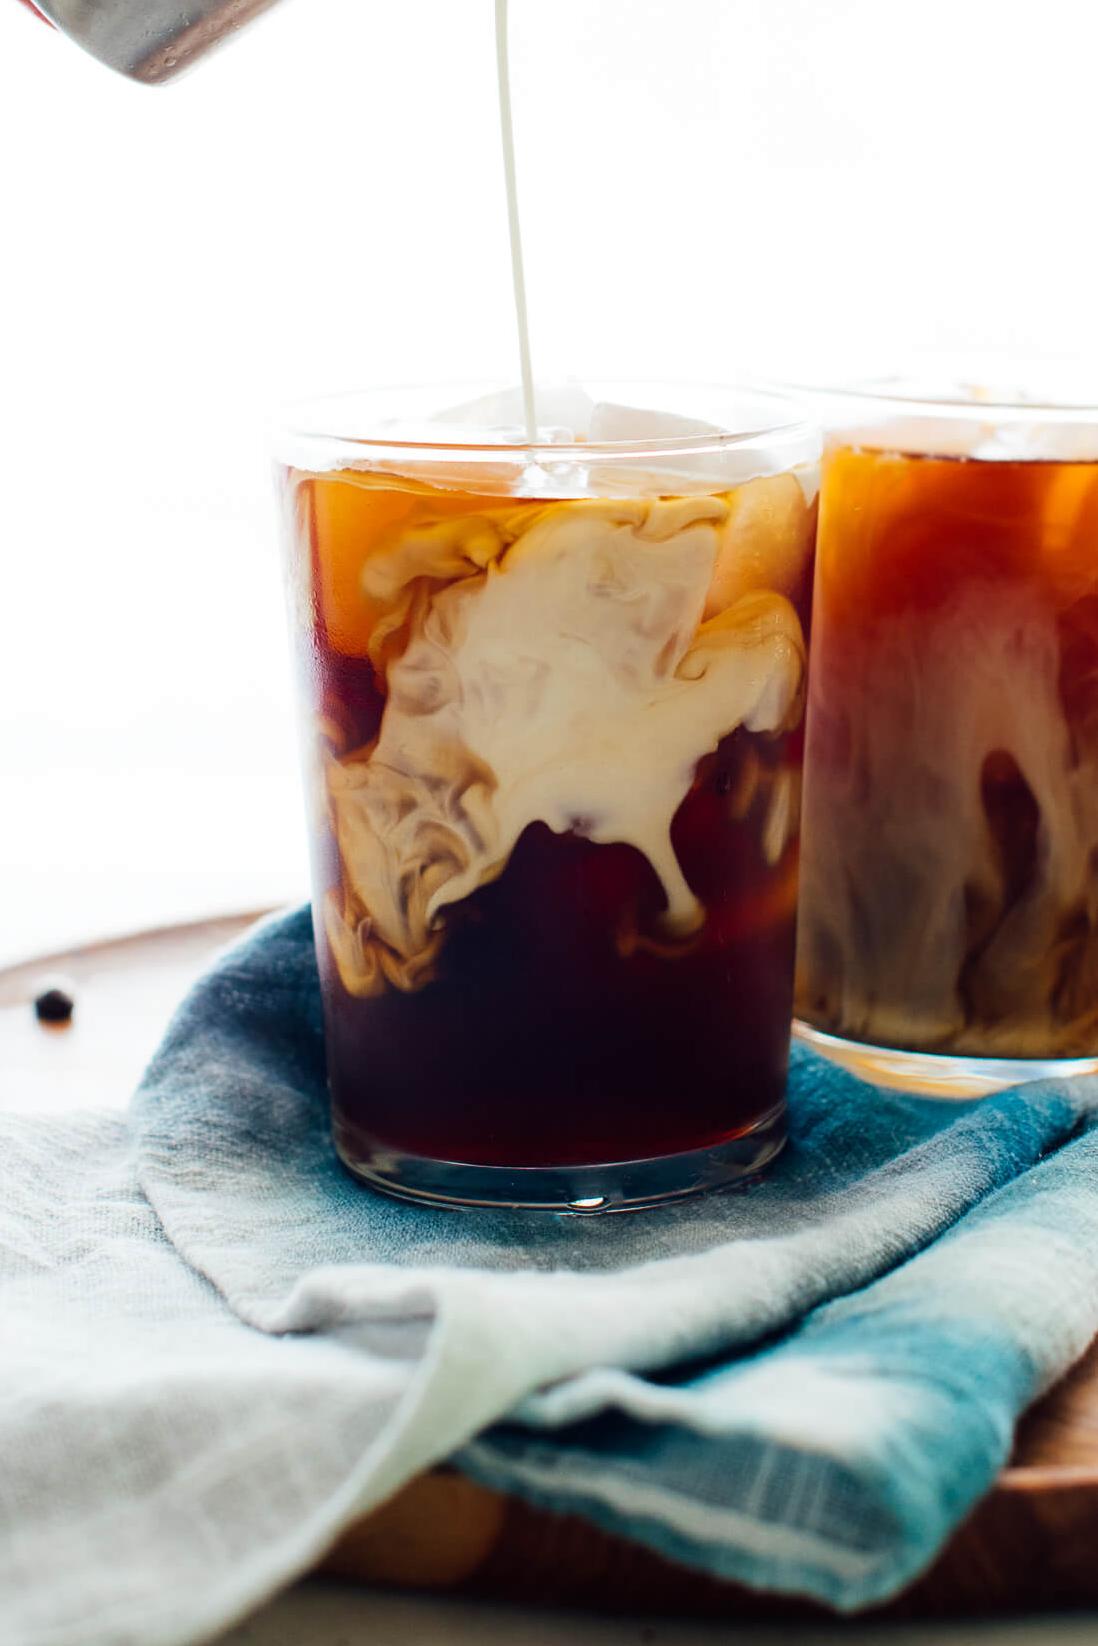  Take a sip of our Coffee Reserve Iced Coffee and taste the difference.